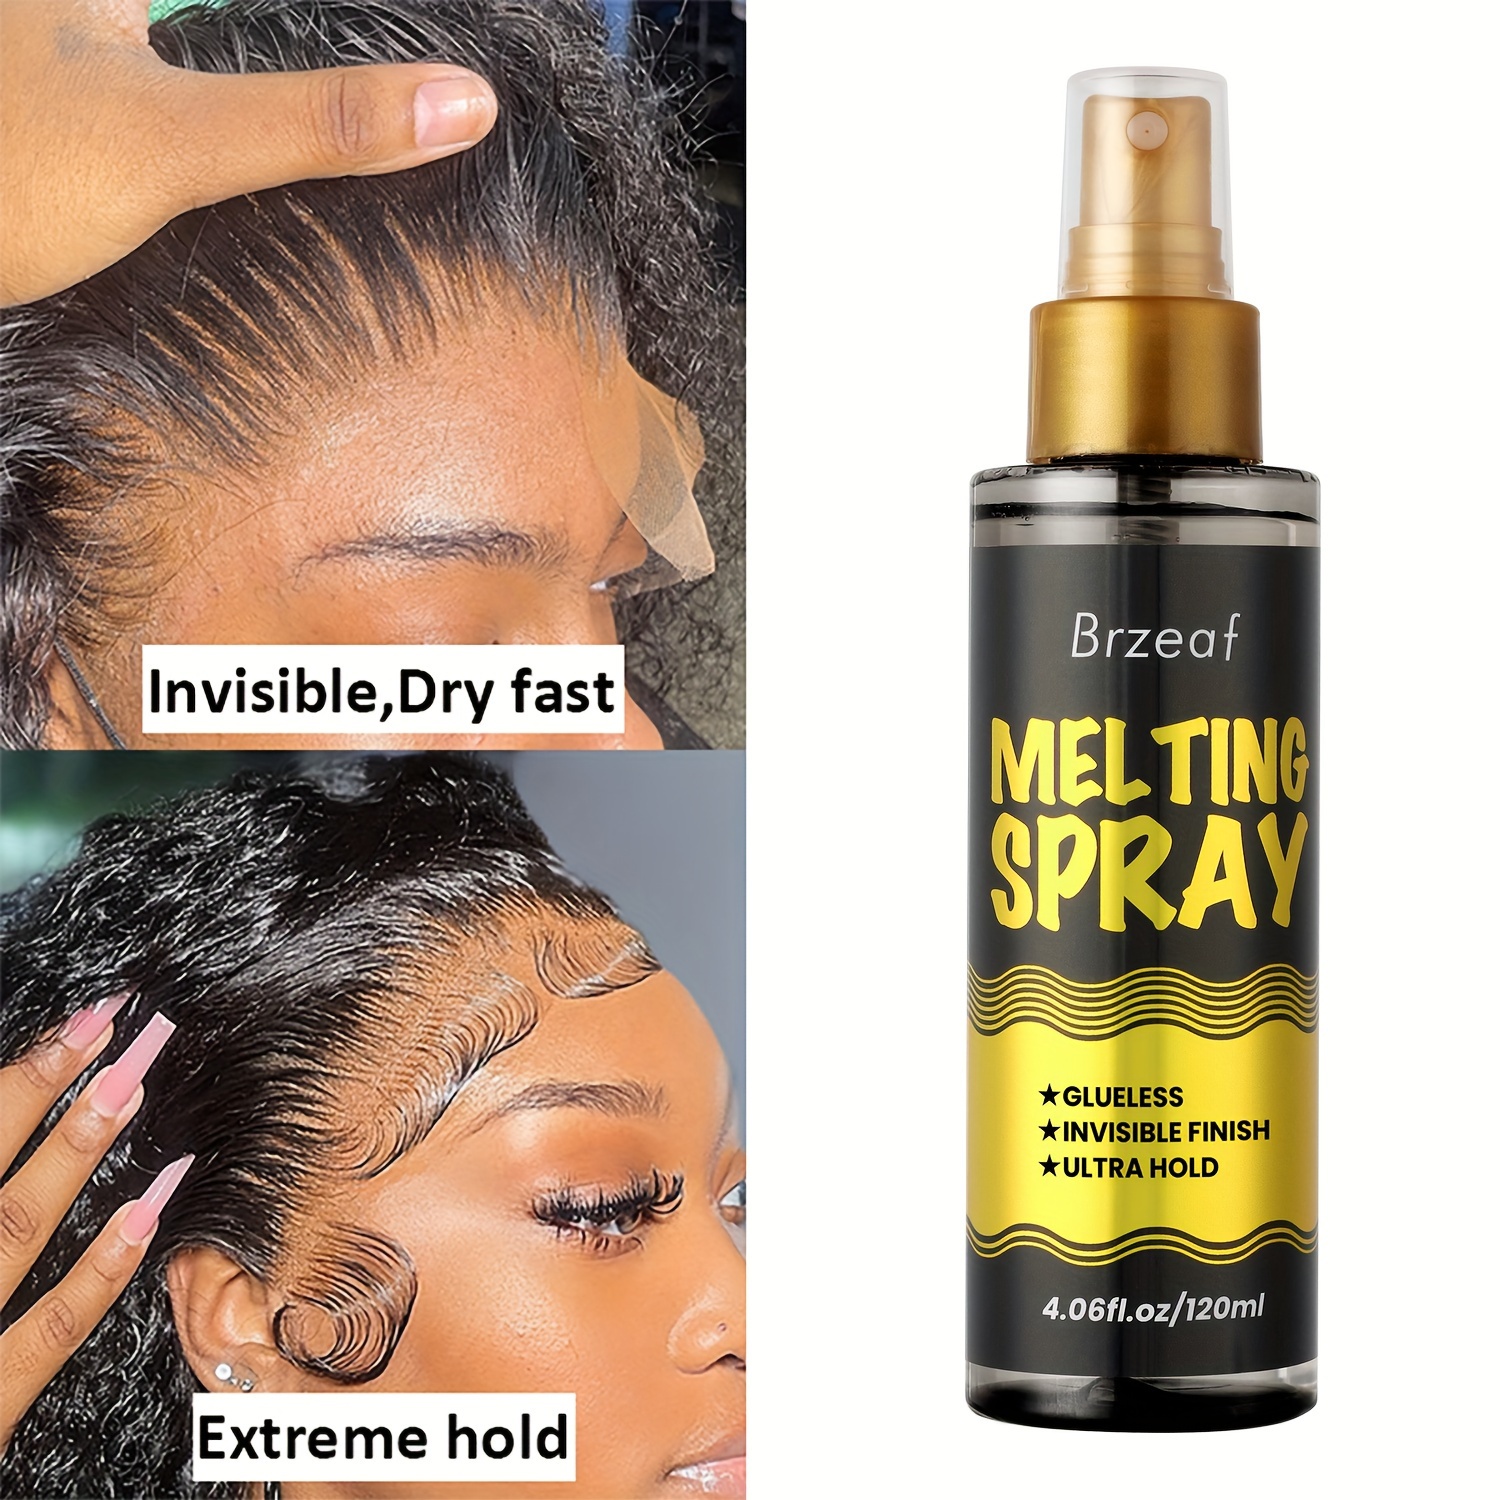 Lace Melting Spray and Holding Spray(120ml), Extreme Hold Melting Spray for Lace  Wigs, Glueless, Strong Natural Finishing Hold, Wig Melting Spray & Hair  Adhesive for Wigs,Black Friday Ofertas Especiales,svendita, for Black Friday